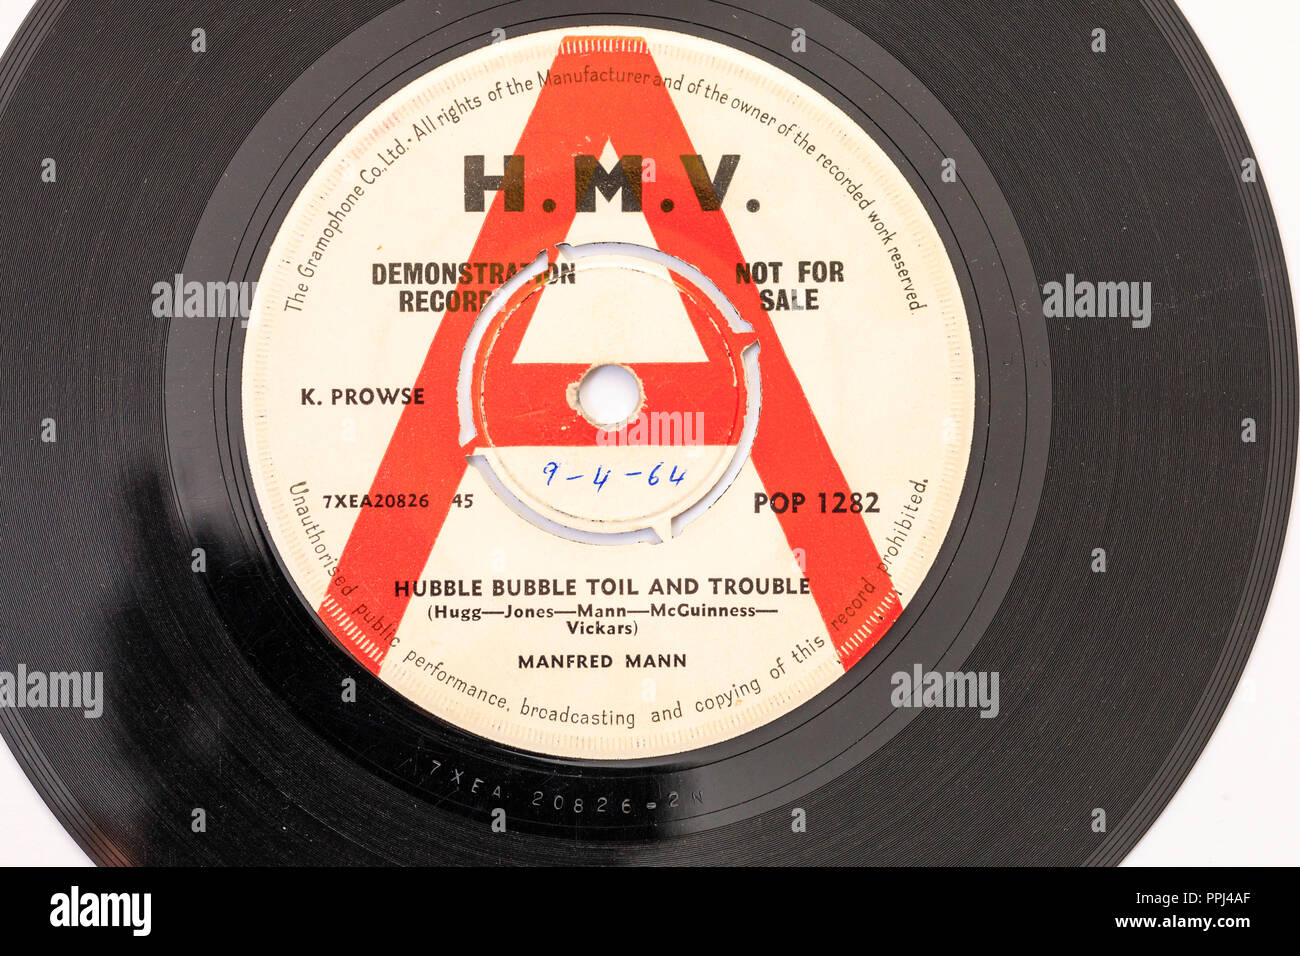 45 single track record. 'A' Demonstration only, not for sale. HMV label, Hubble Bubble Toil and Trouble, Manfred Mann. 1964. Label and part of record. Stock Photo